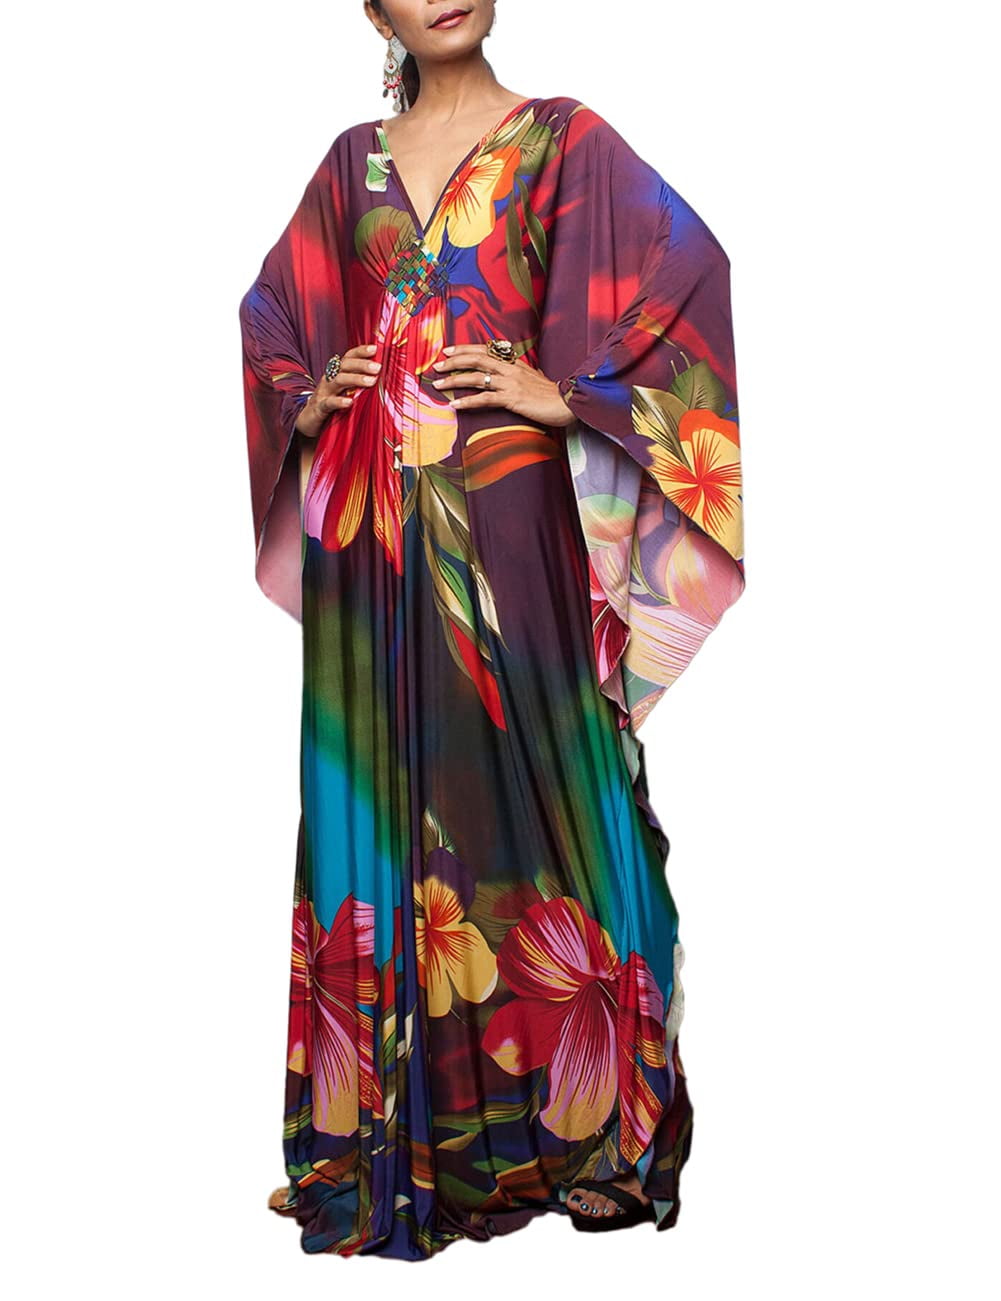 Bsubseach Plus Size Caftan Dress for Women Swimsuit Cover Up Summer ...